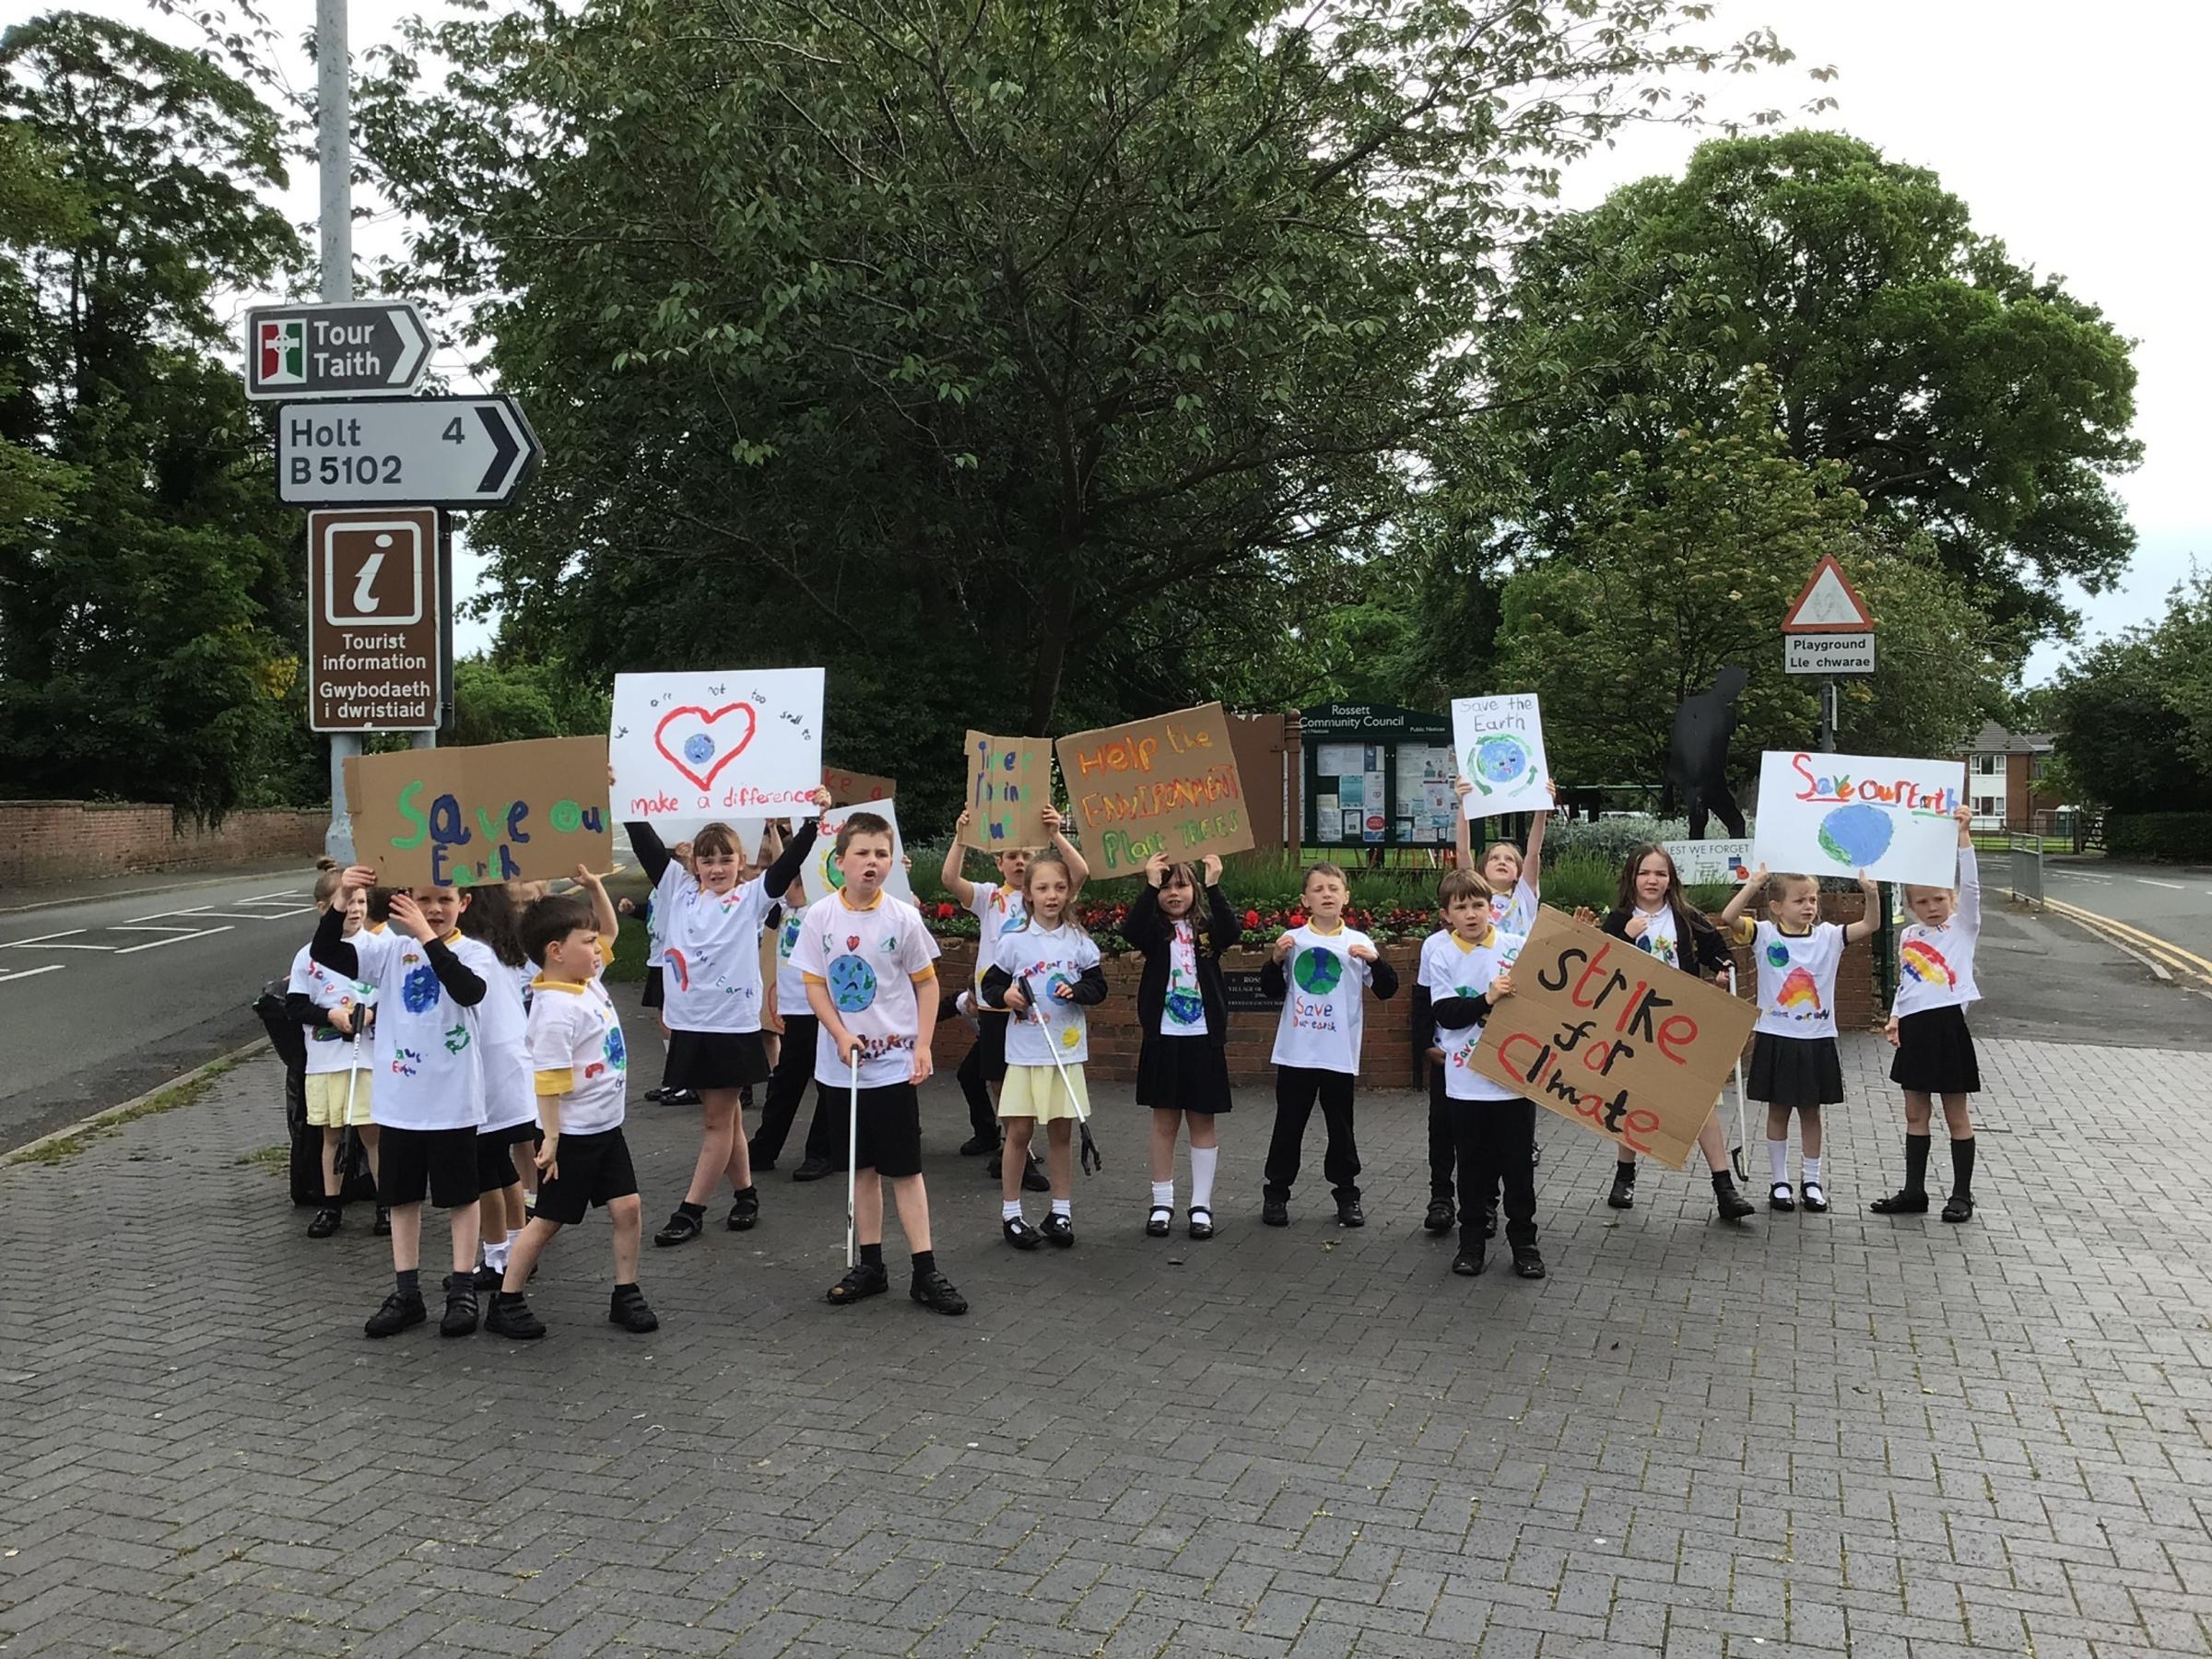 Year 2 at St Peters School, Rossett, have been campaigning against climate change.